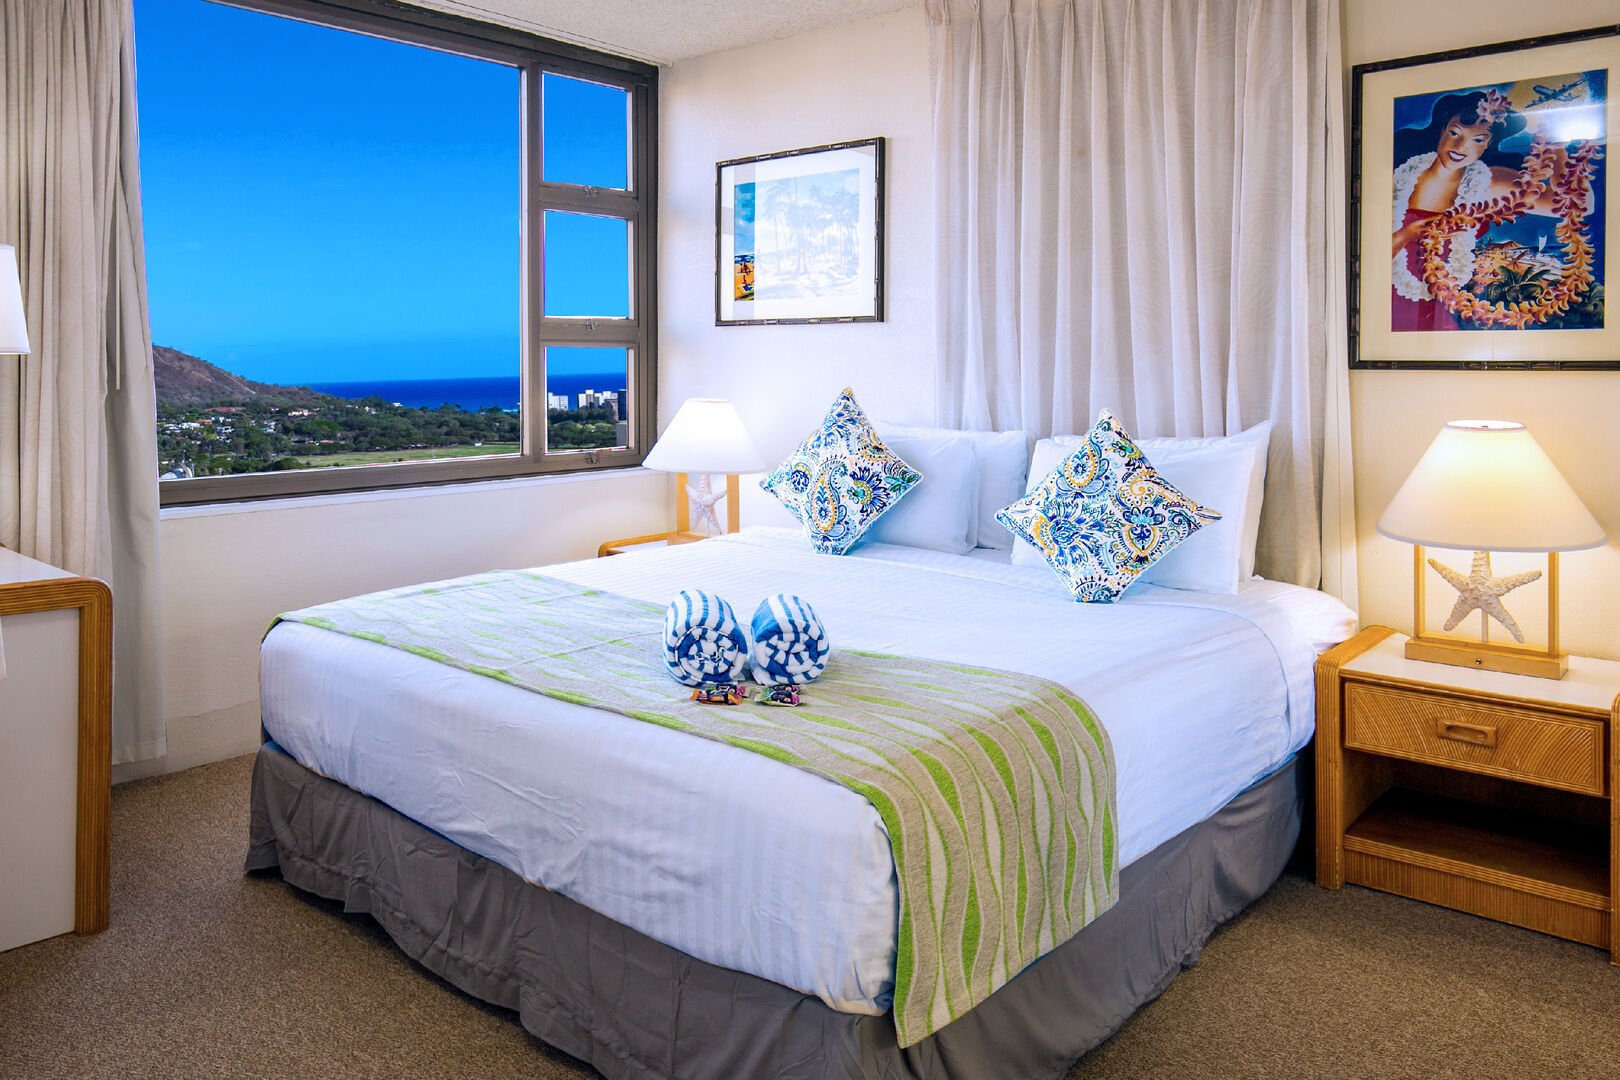 The bedroom features a king-size bed and Ocean and Diamond Head views.